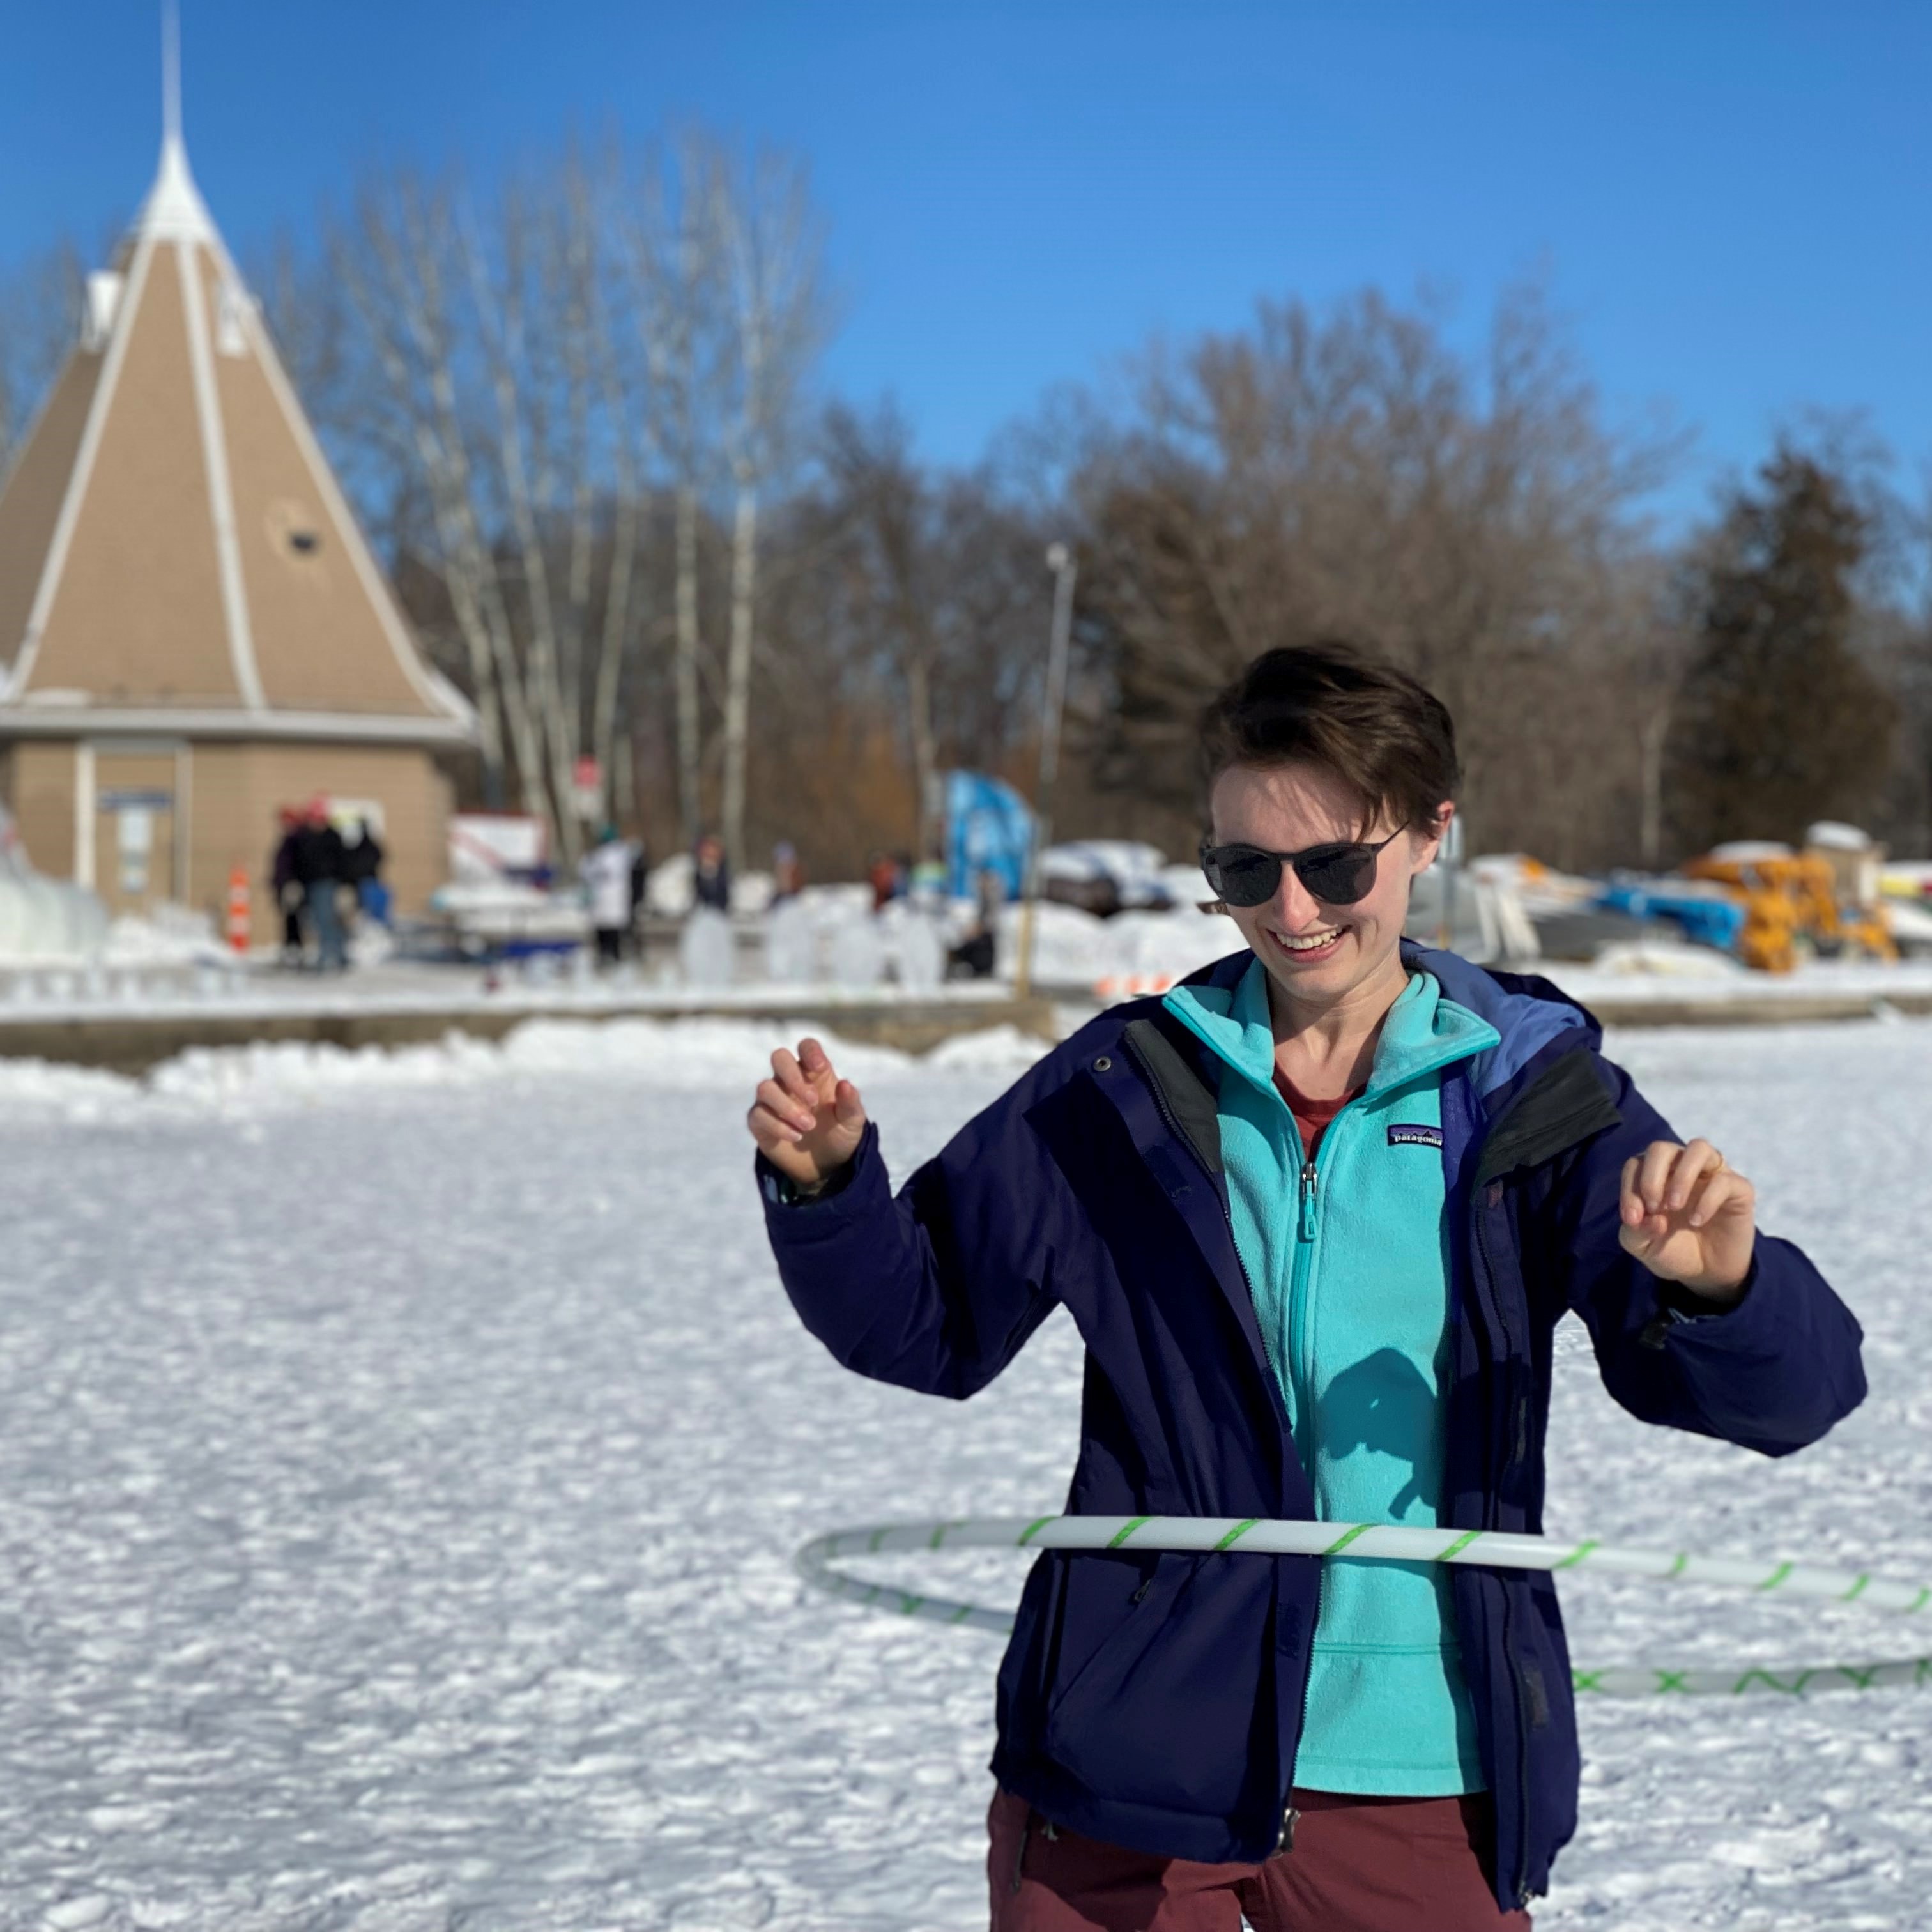 Annie enjoying a bright winter day hula hooping on frozen Lake Harriet in Minneapolis